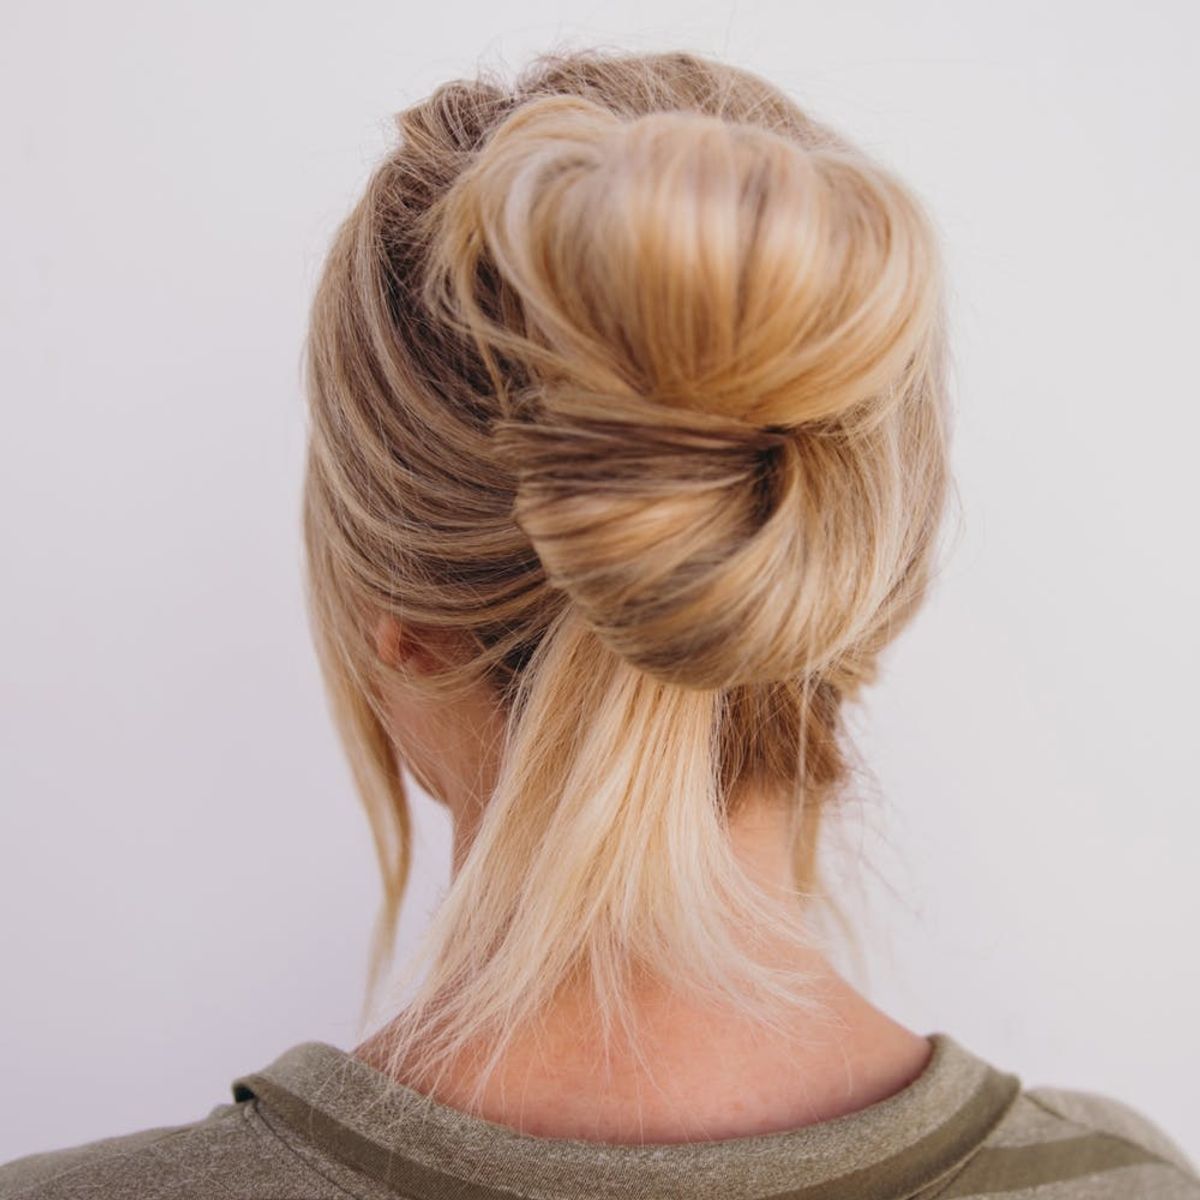 5 Quick and Easy Hairstyles That Look Even Better With Extensions